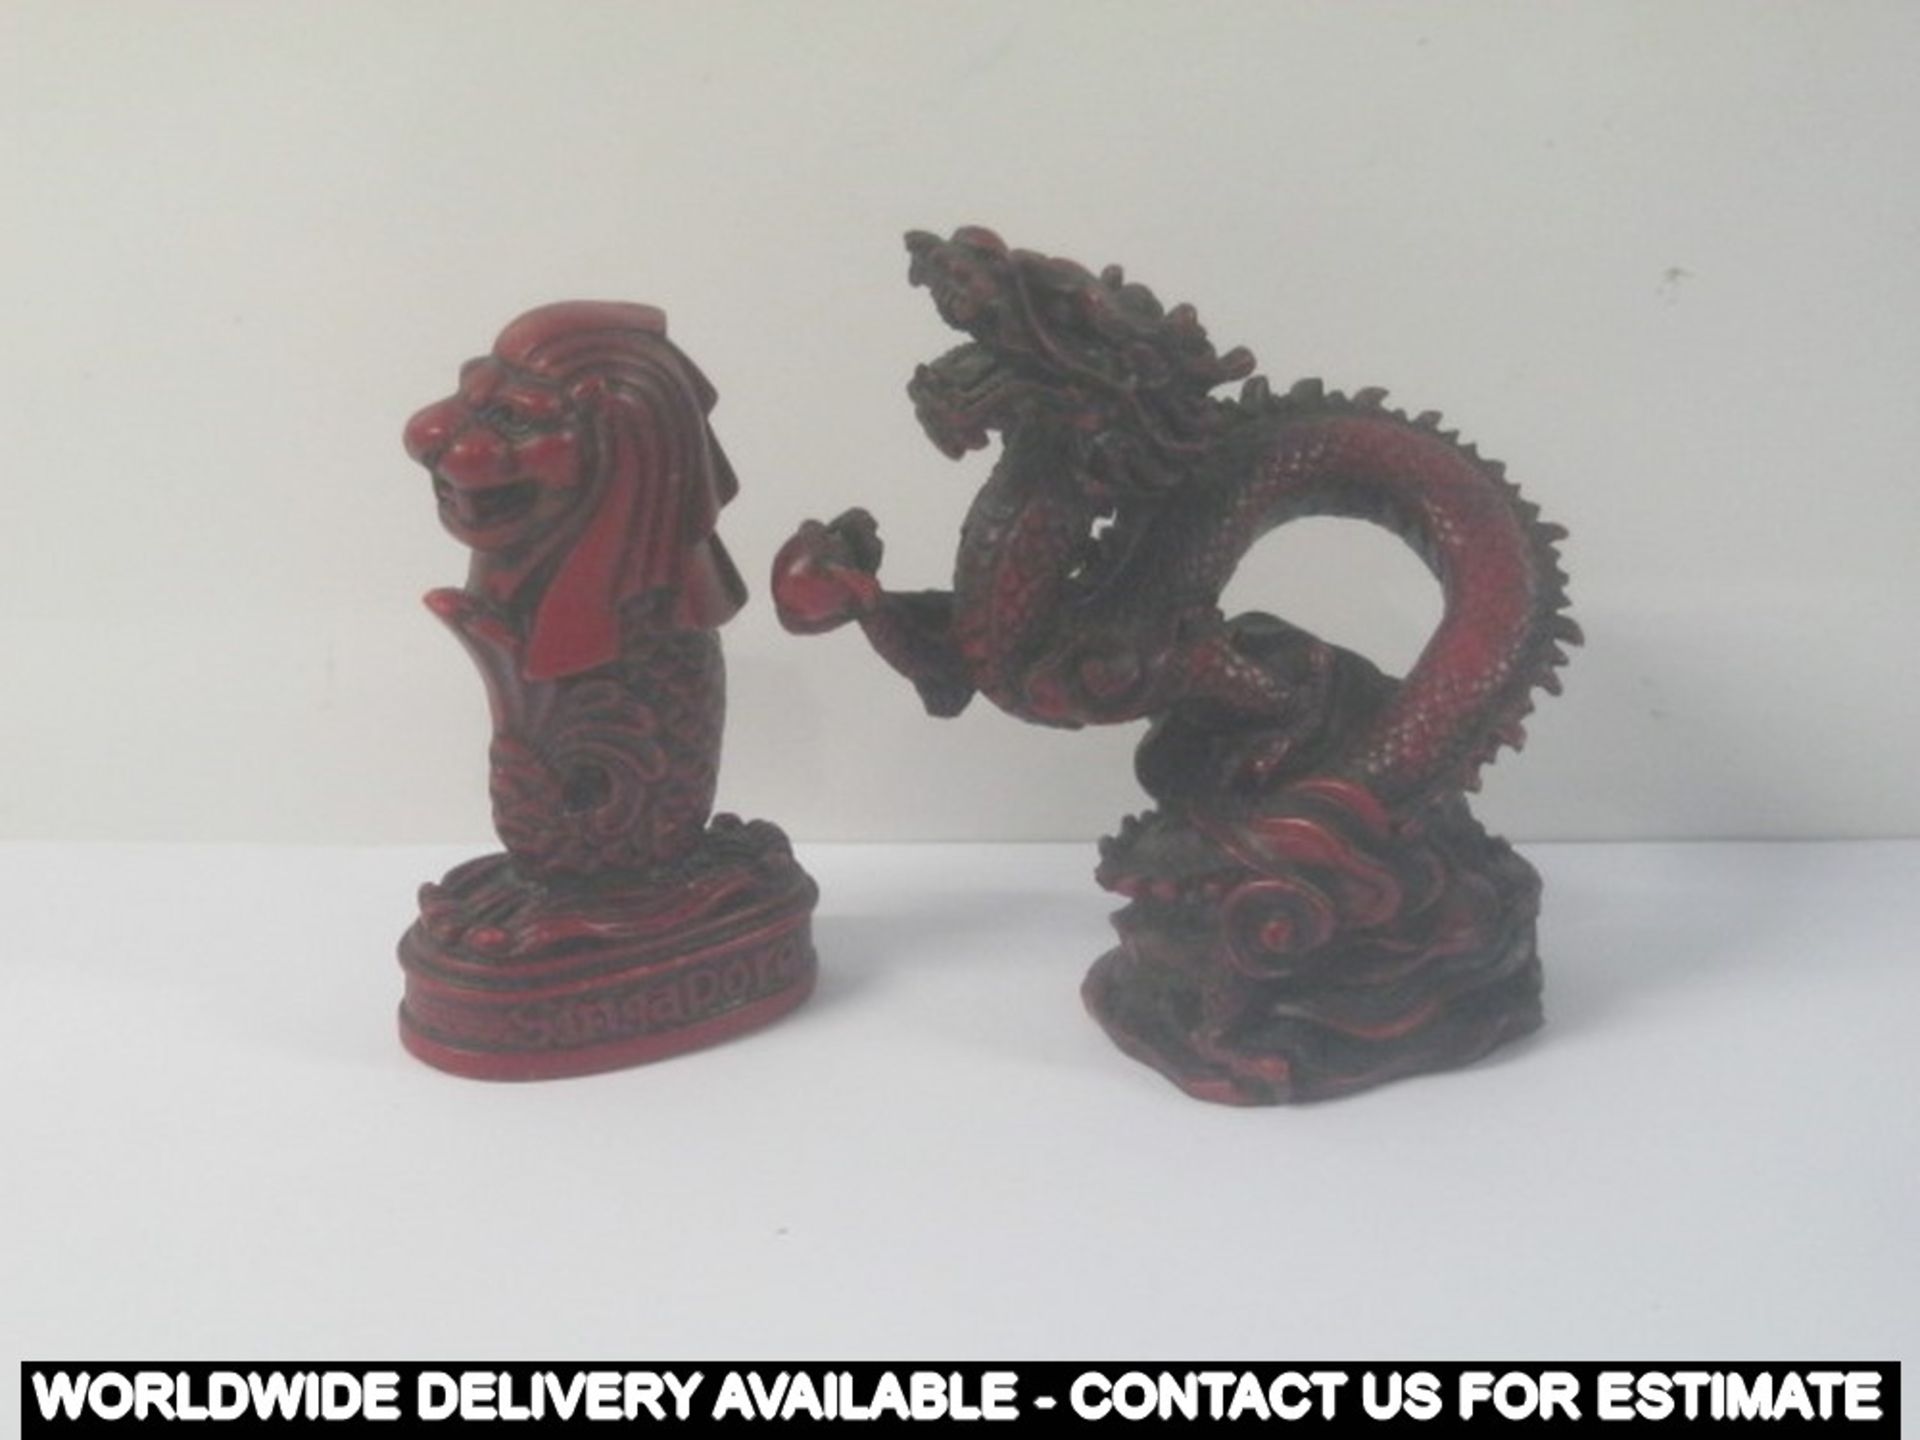 2 x red resin dragons - one marked SINGAPORE and MERLION